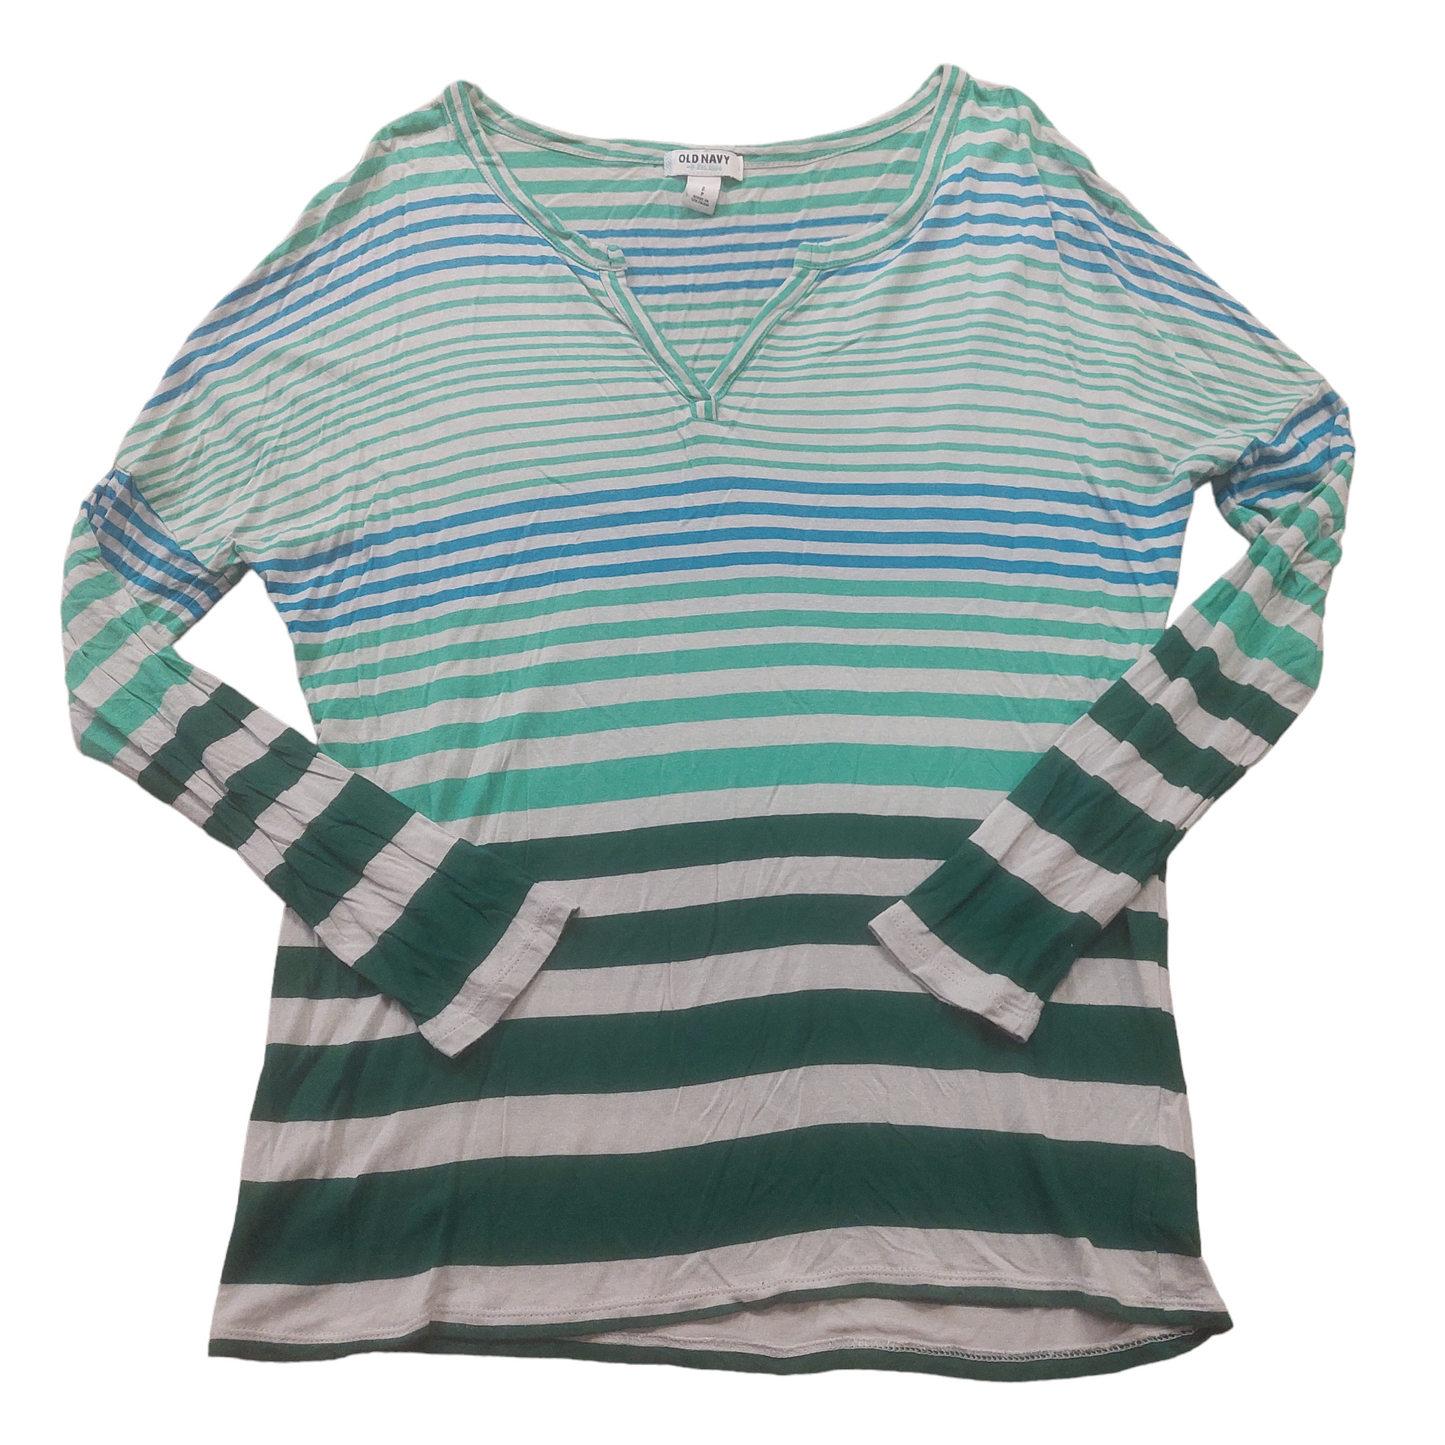 Striped Top Long Sleeve Old Navy, Size S